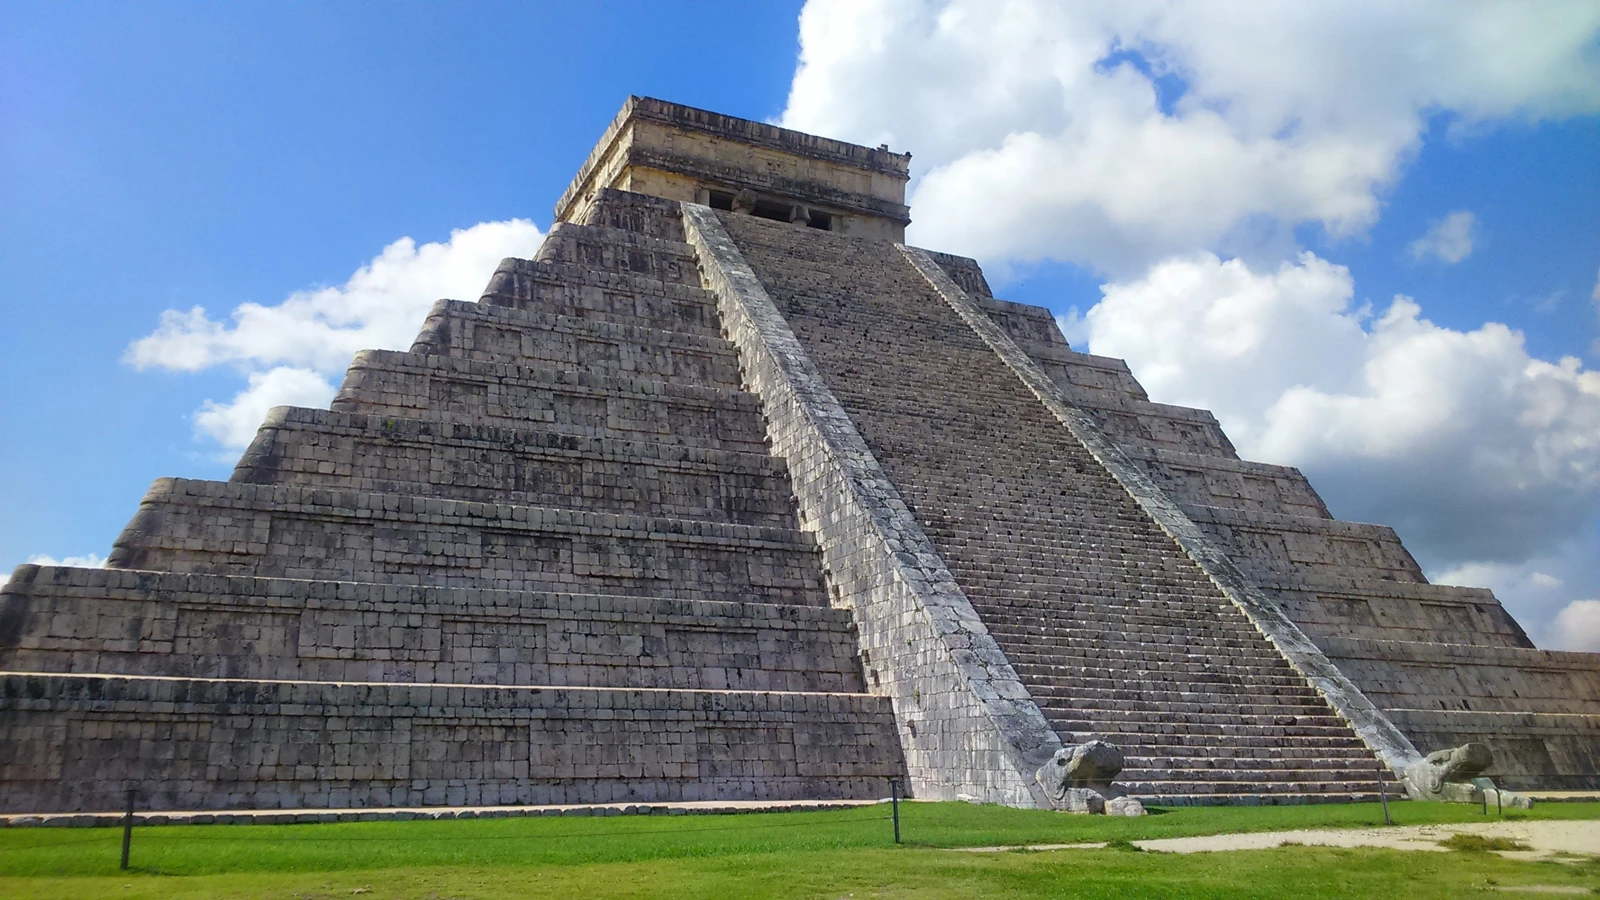 The stone pyramid at Chichén Itzá, Mexico on a sunny day